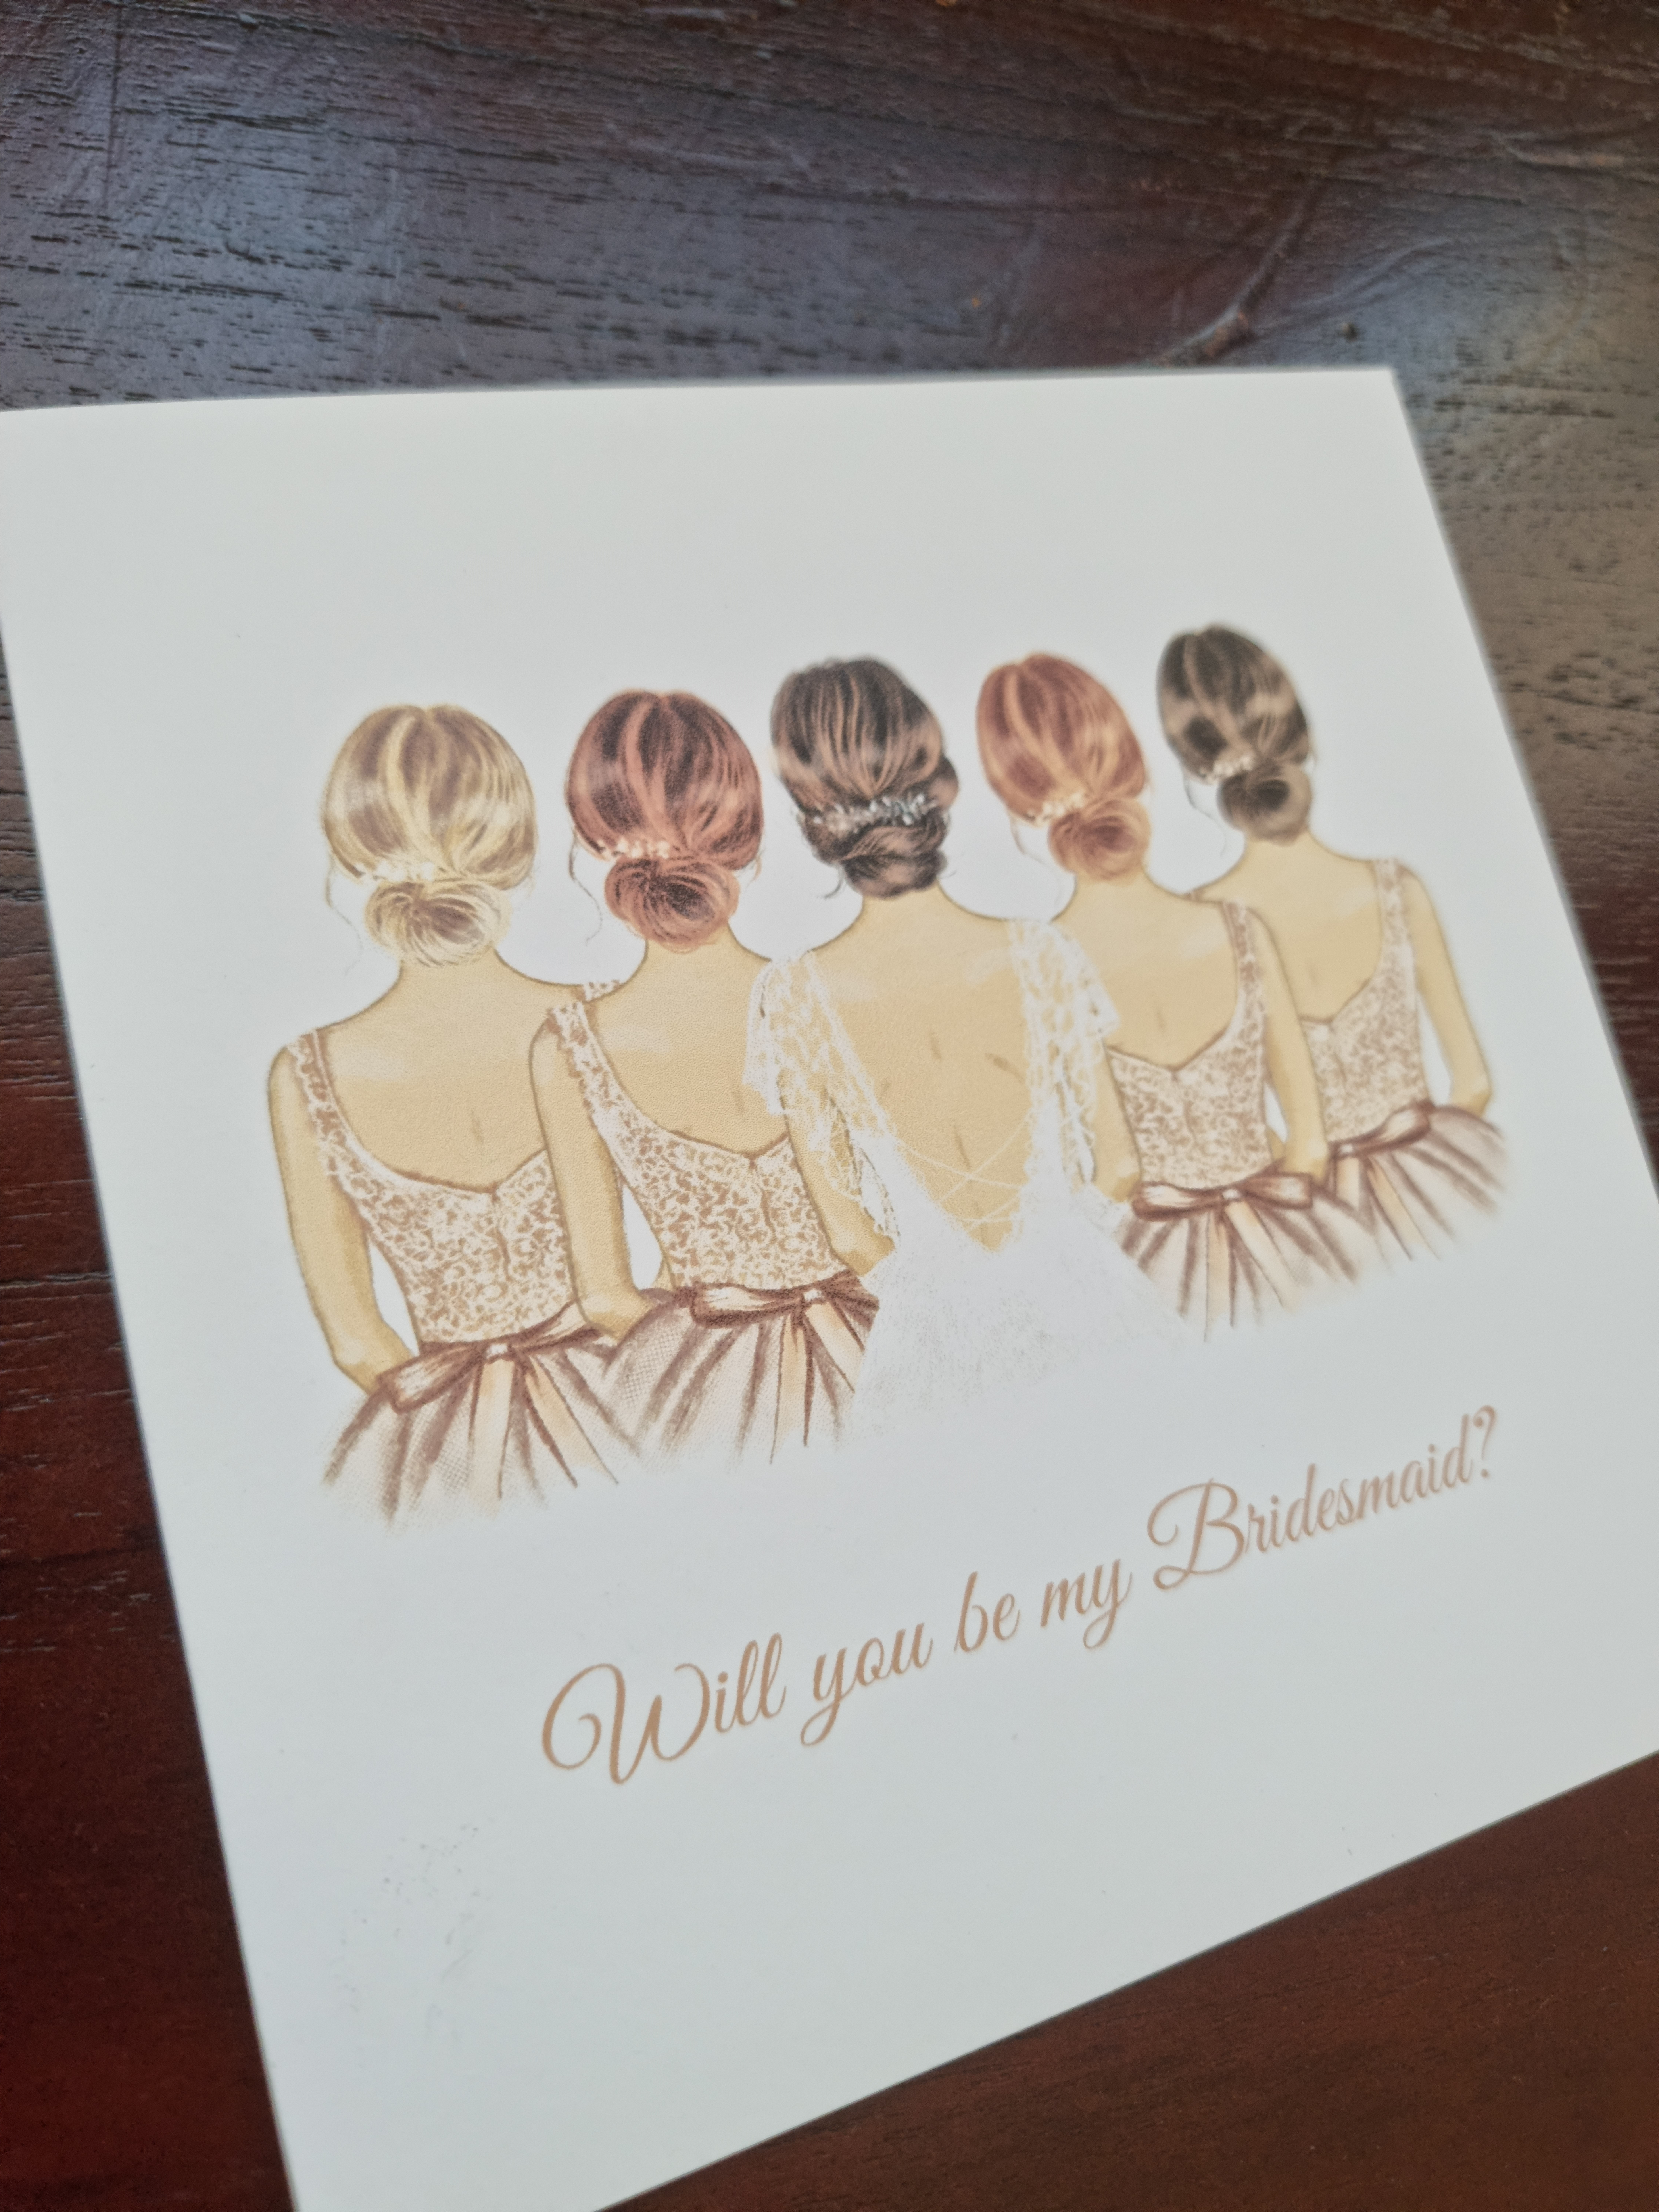 Will you be my Bridesmaid - Group of girls